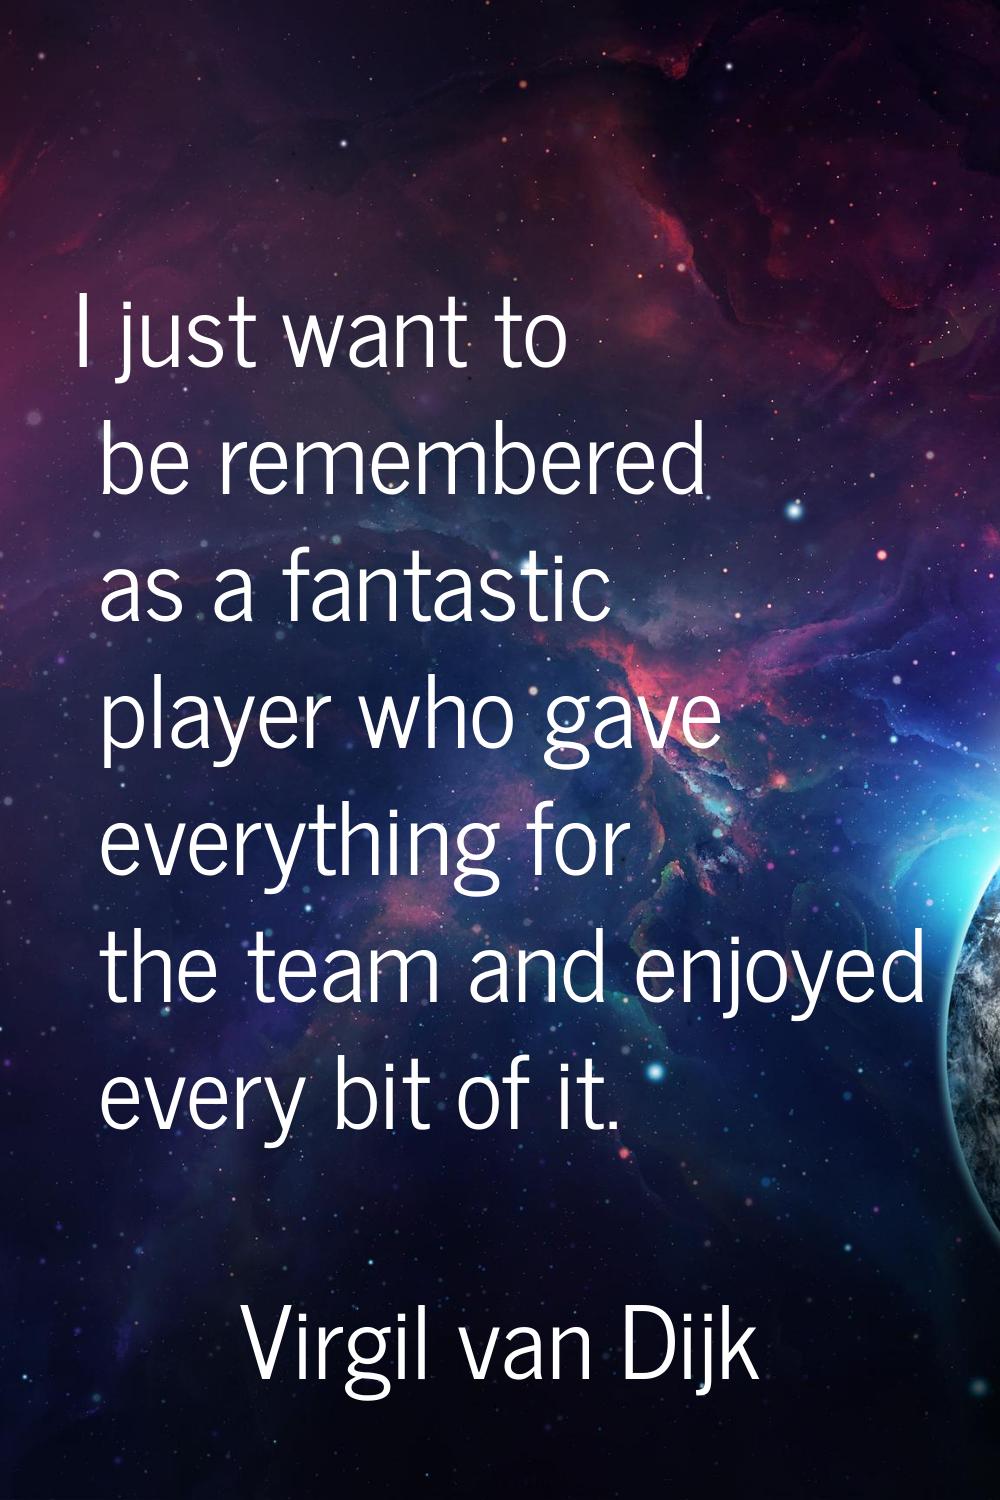 I just want to be remembered as a fantastic player who gave everything for the team and enjoyed eve